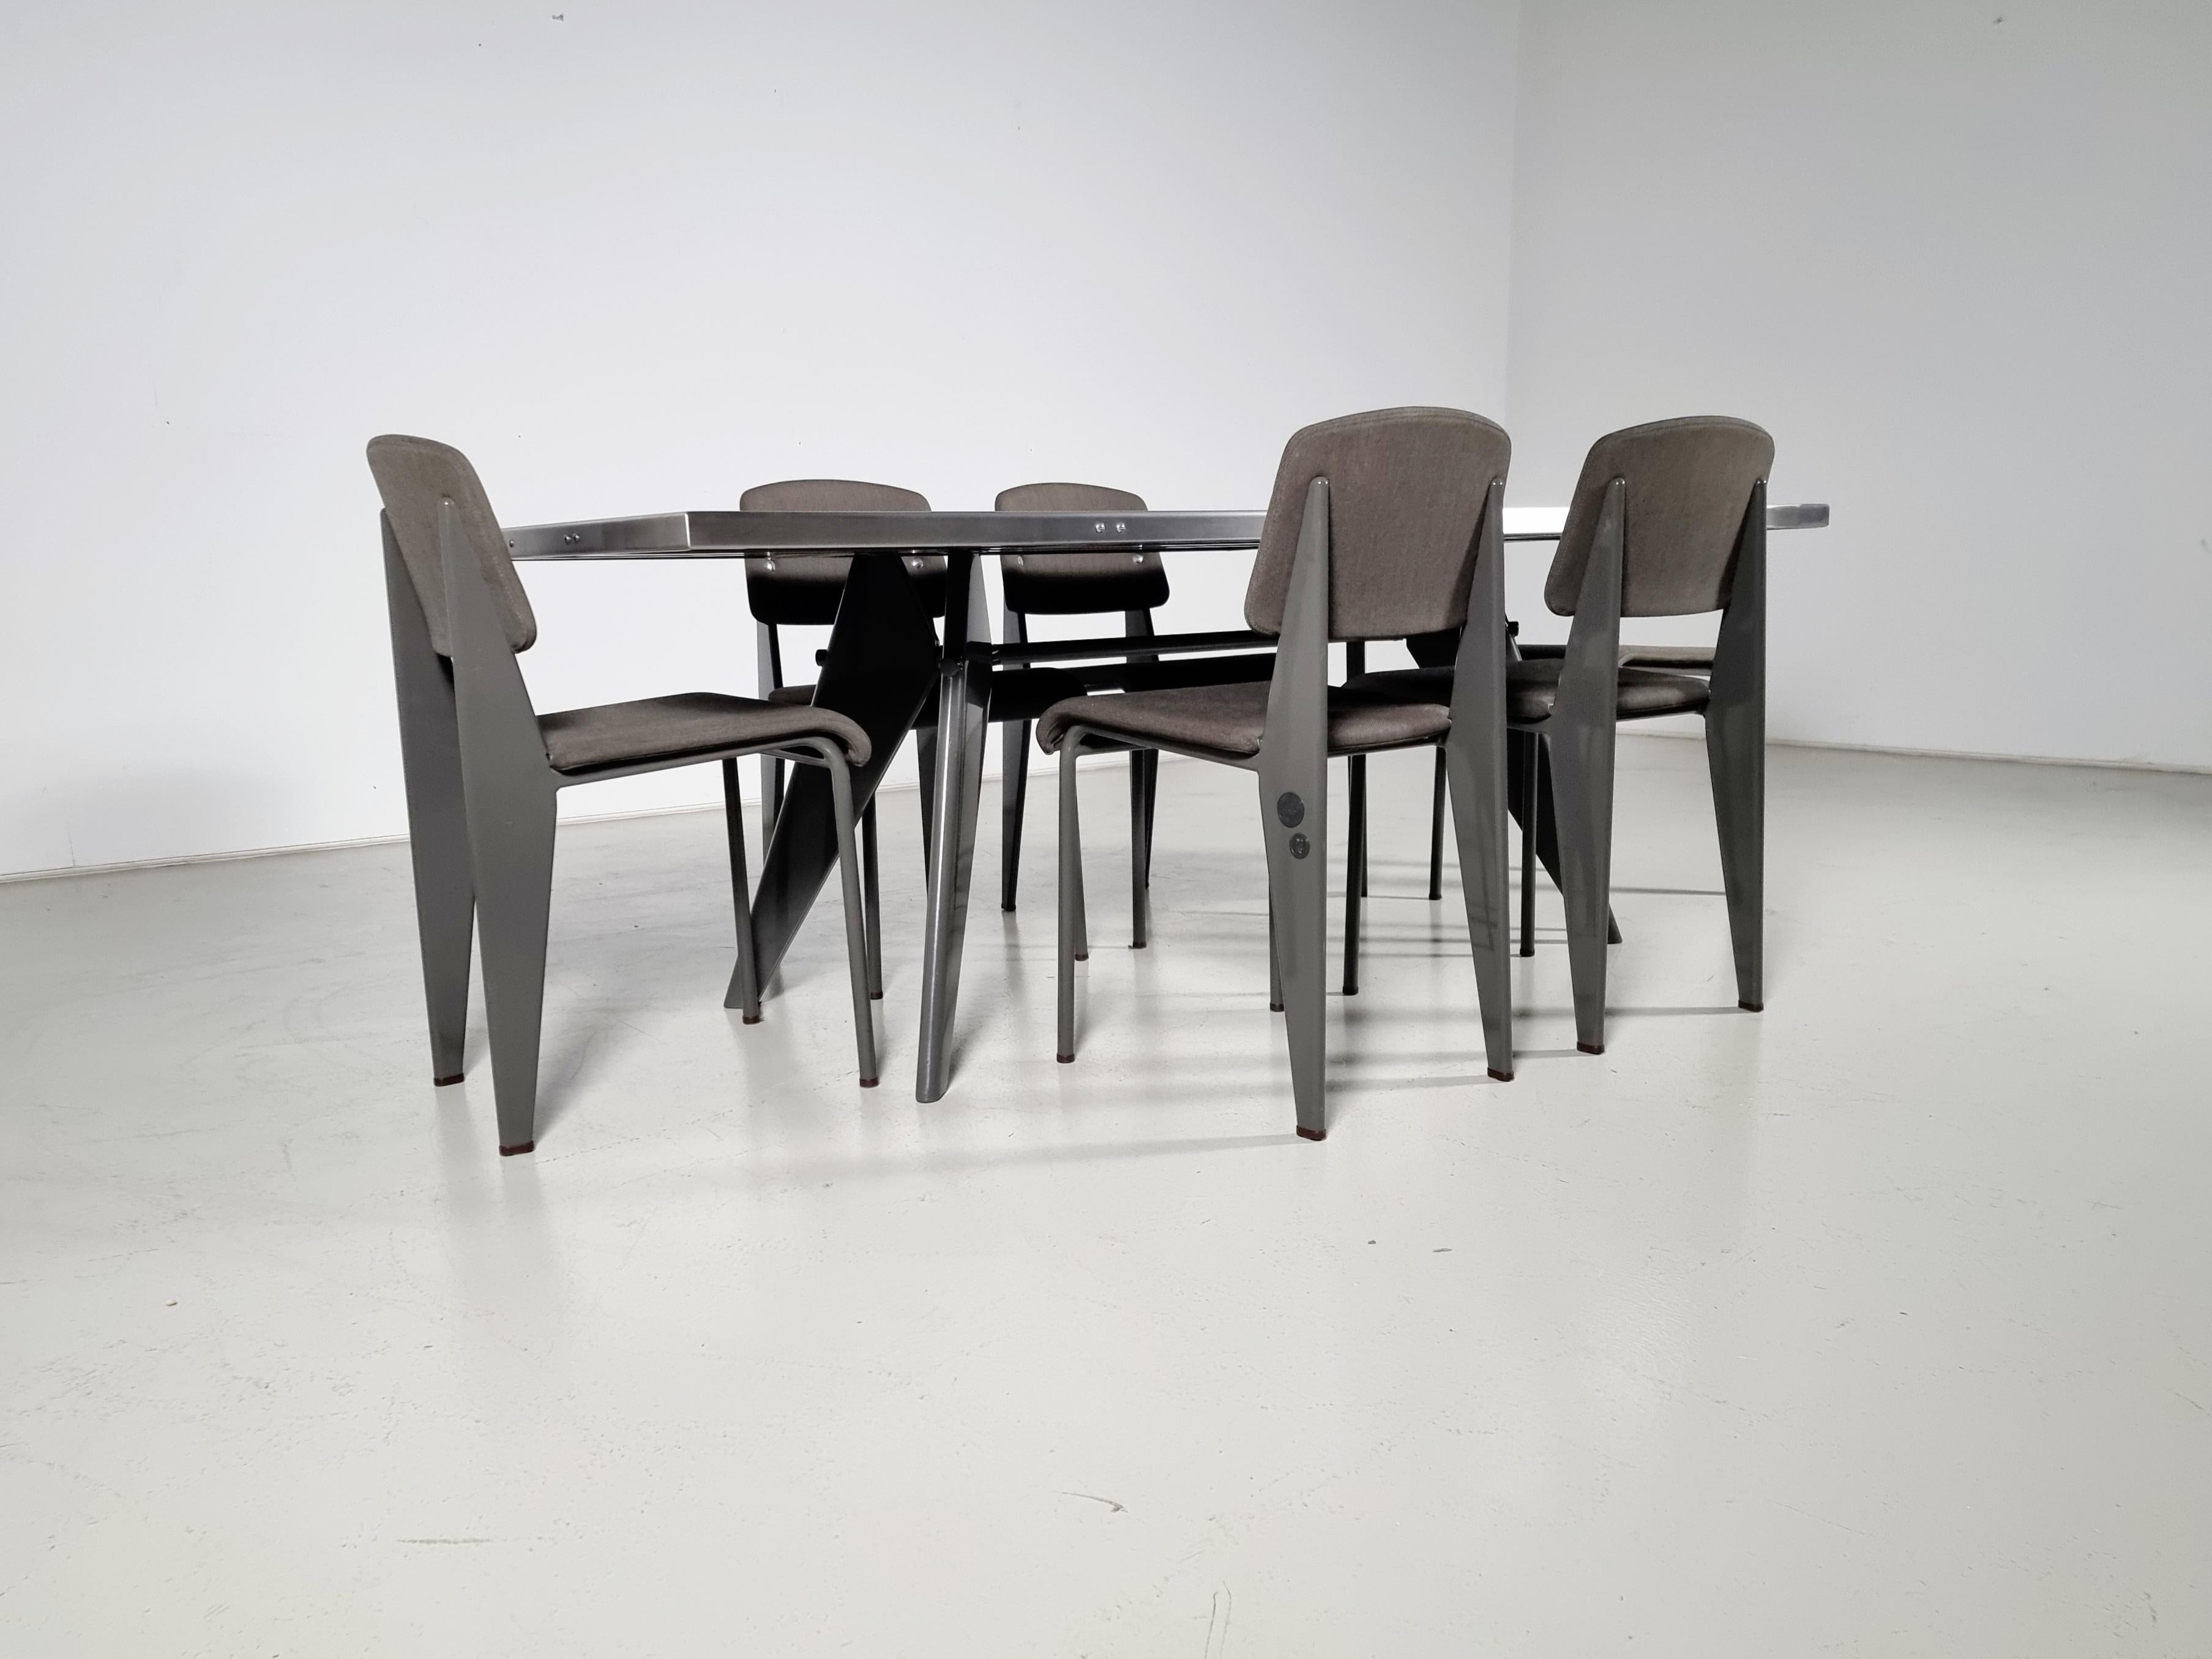 2011 Jean Prouvé by G-Star Raw for Vitra S.A.M. Tropique table with matching standard chairs. This limited edition table was only produced in this version for one year in 2011. Other reissues have different finishes and tops. This one is tagged